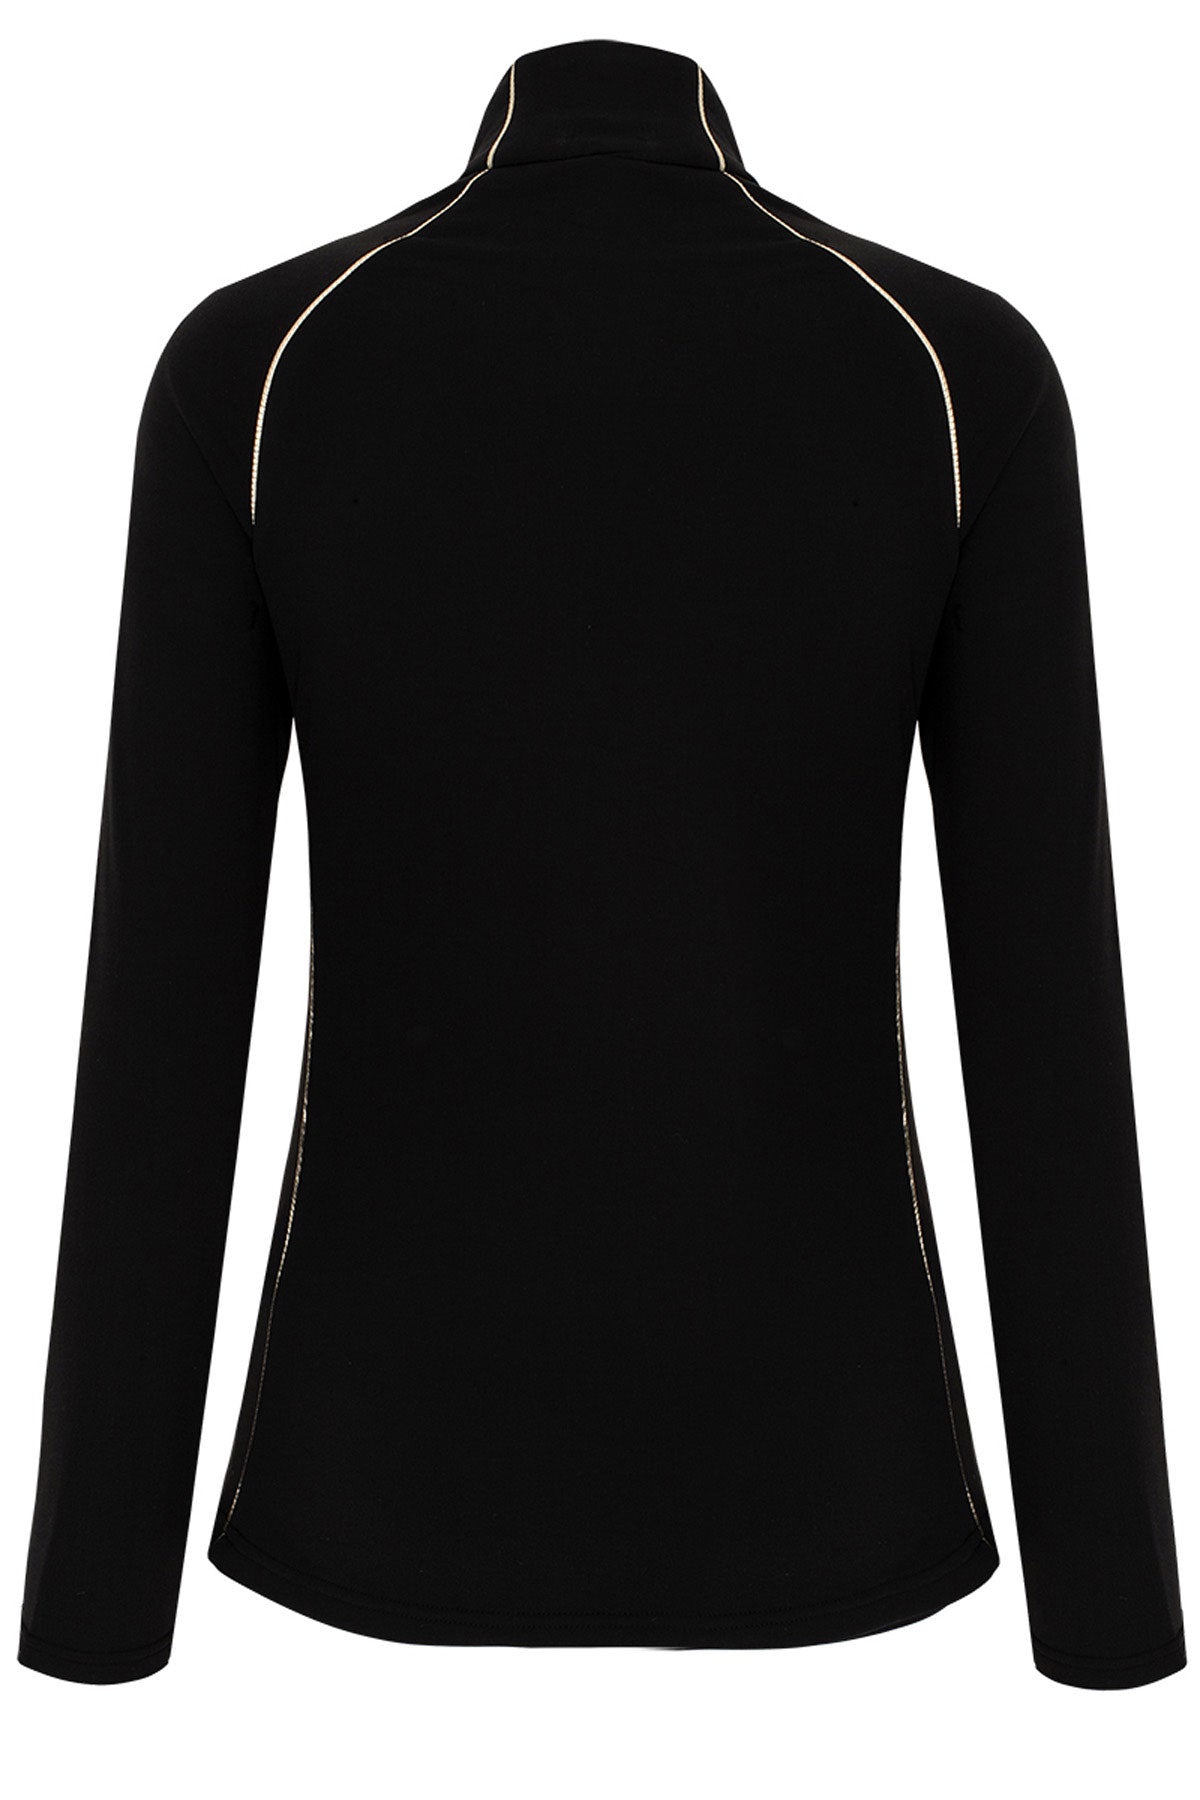 High Society Rory Half Zip Base Layer in Black and Gold